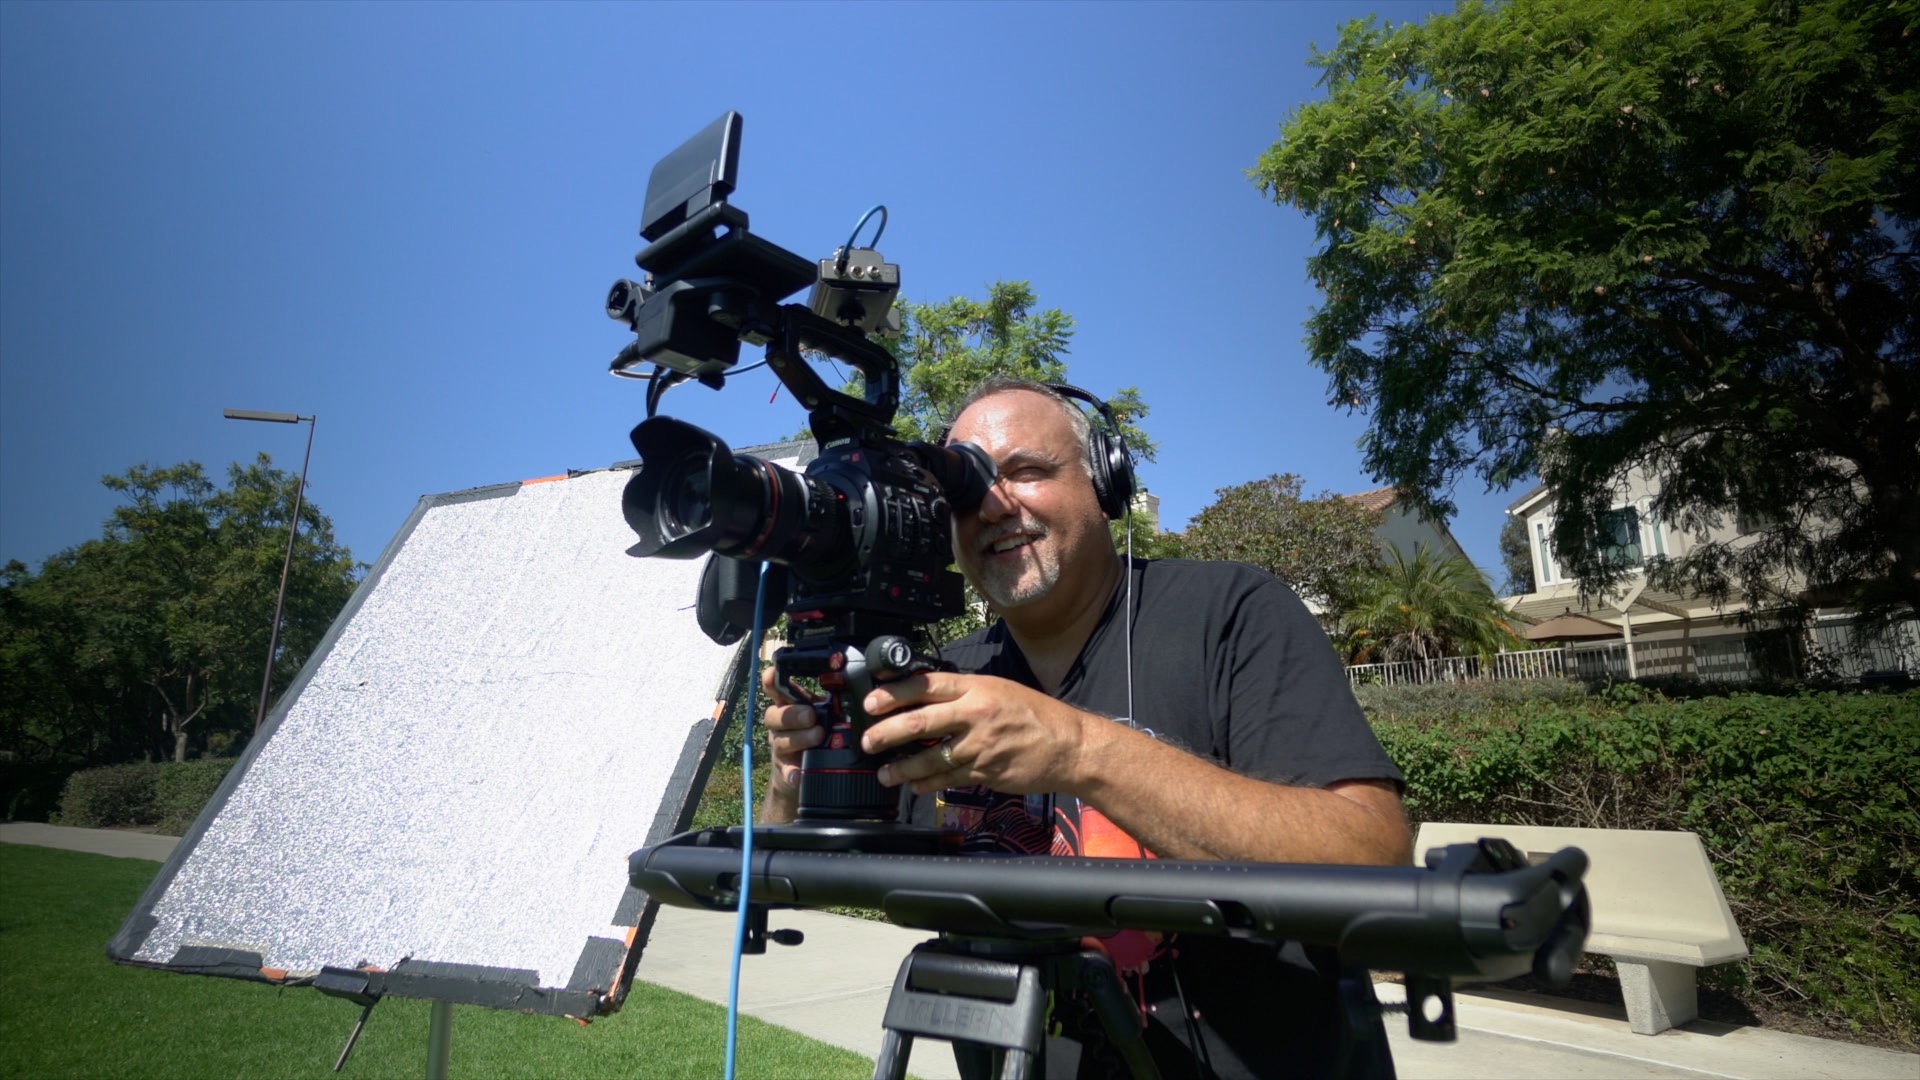 Syrp Magic Carpet Pro hands-on review - Newsshooter